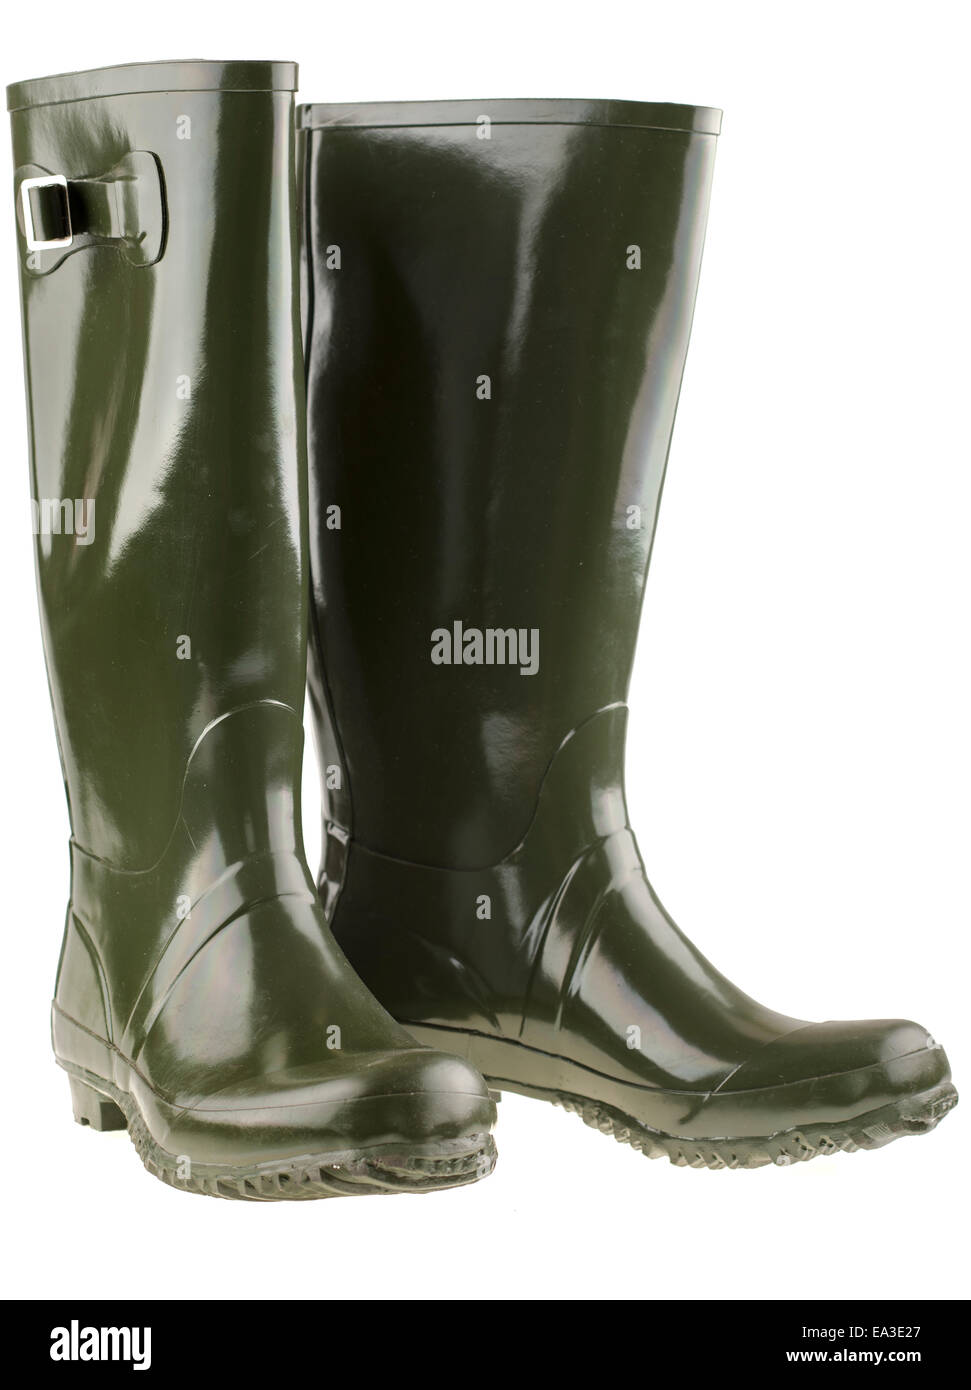 Pair of new green wellington boots  wellies Stock Photo